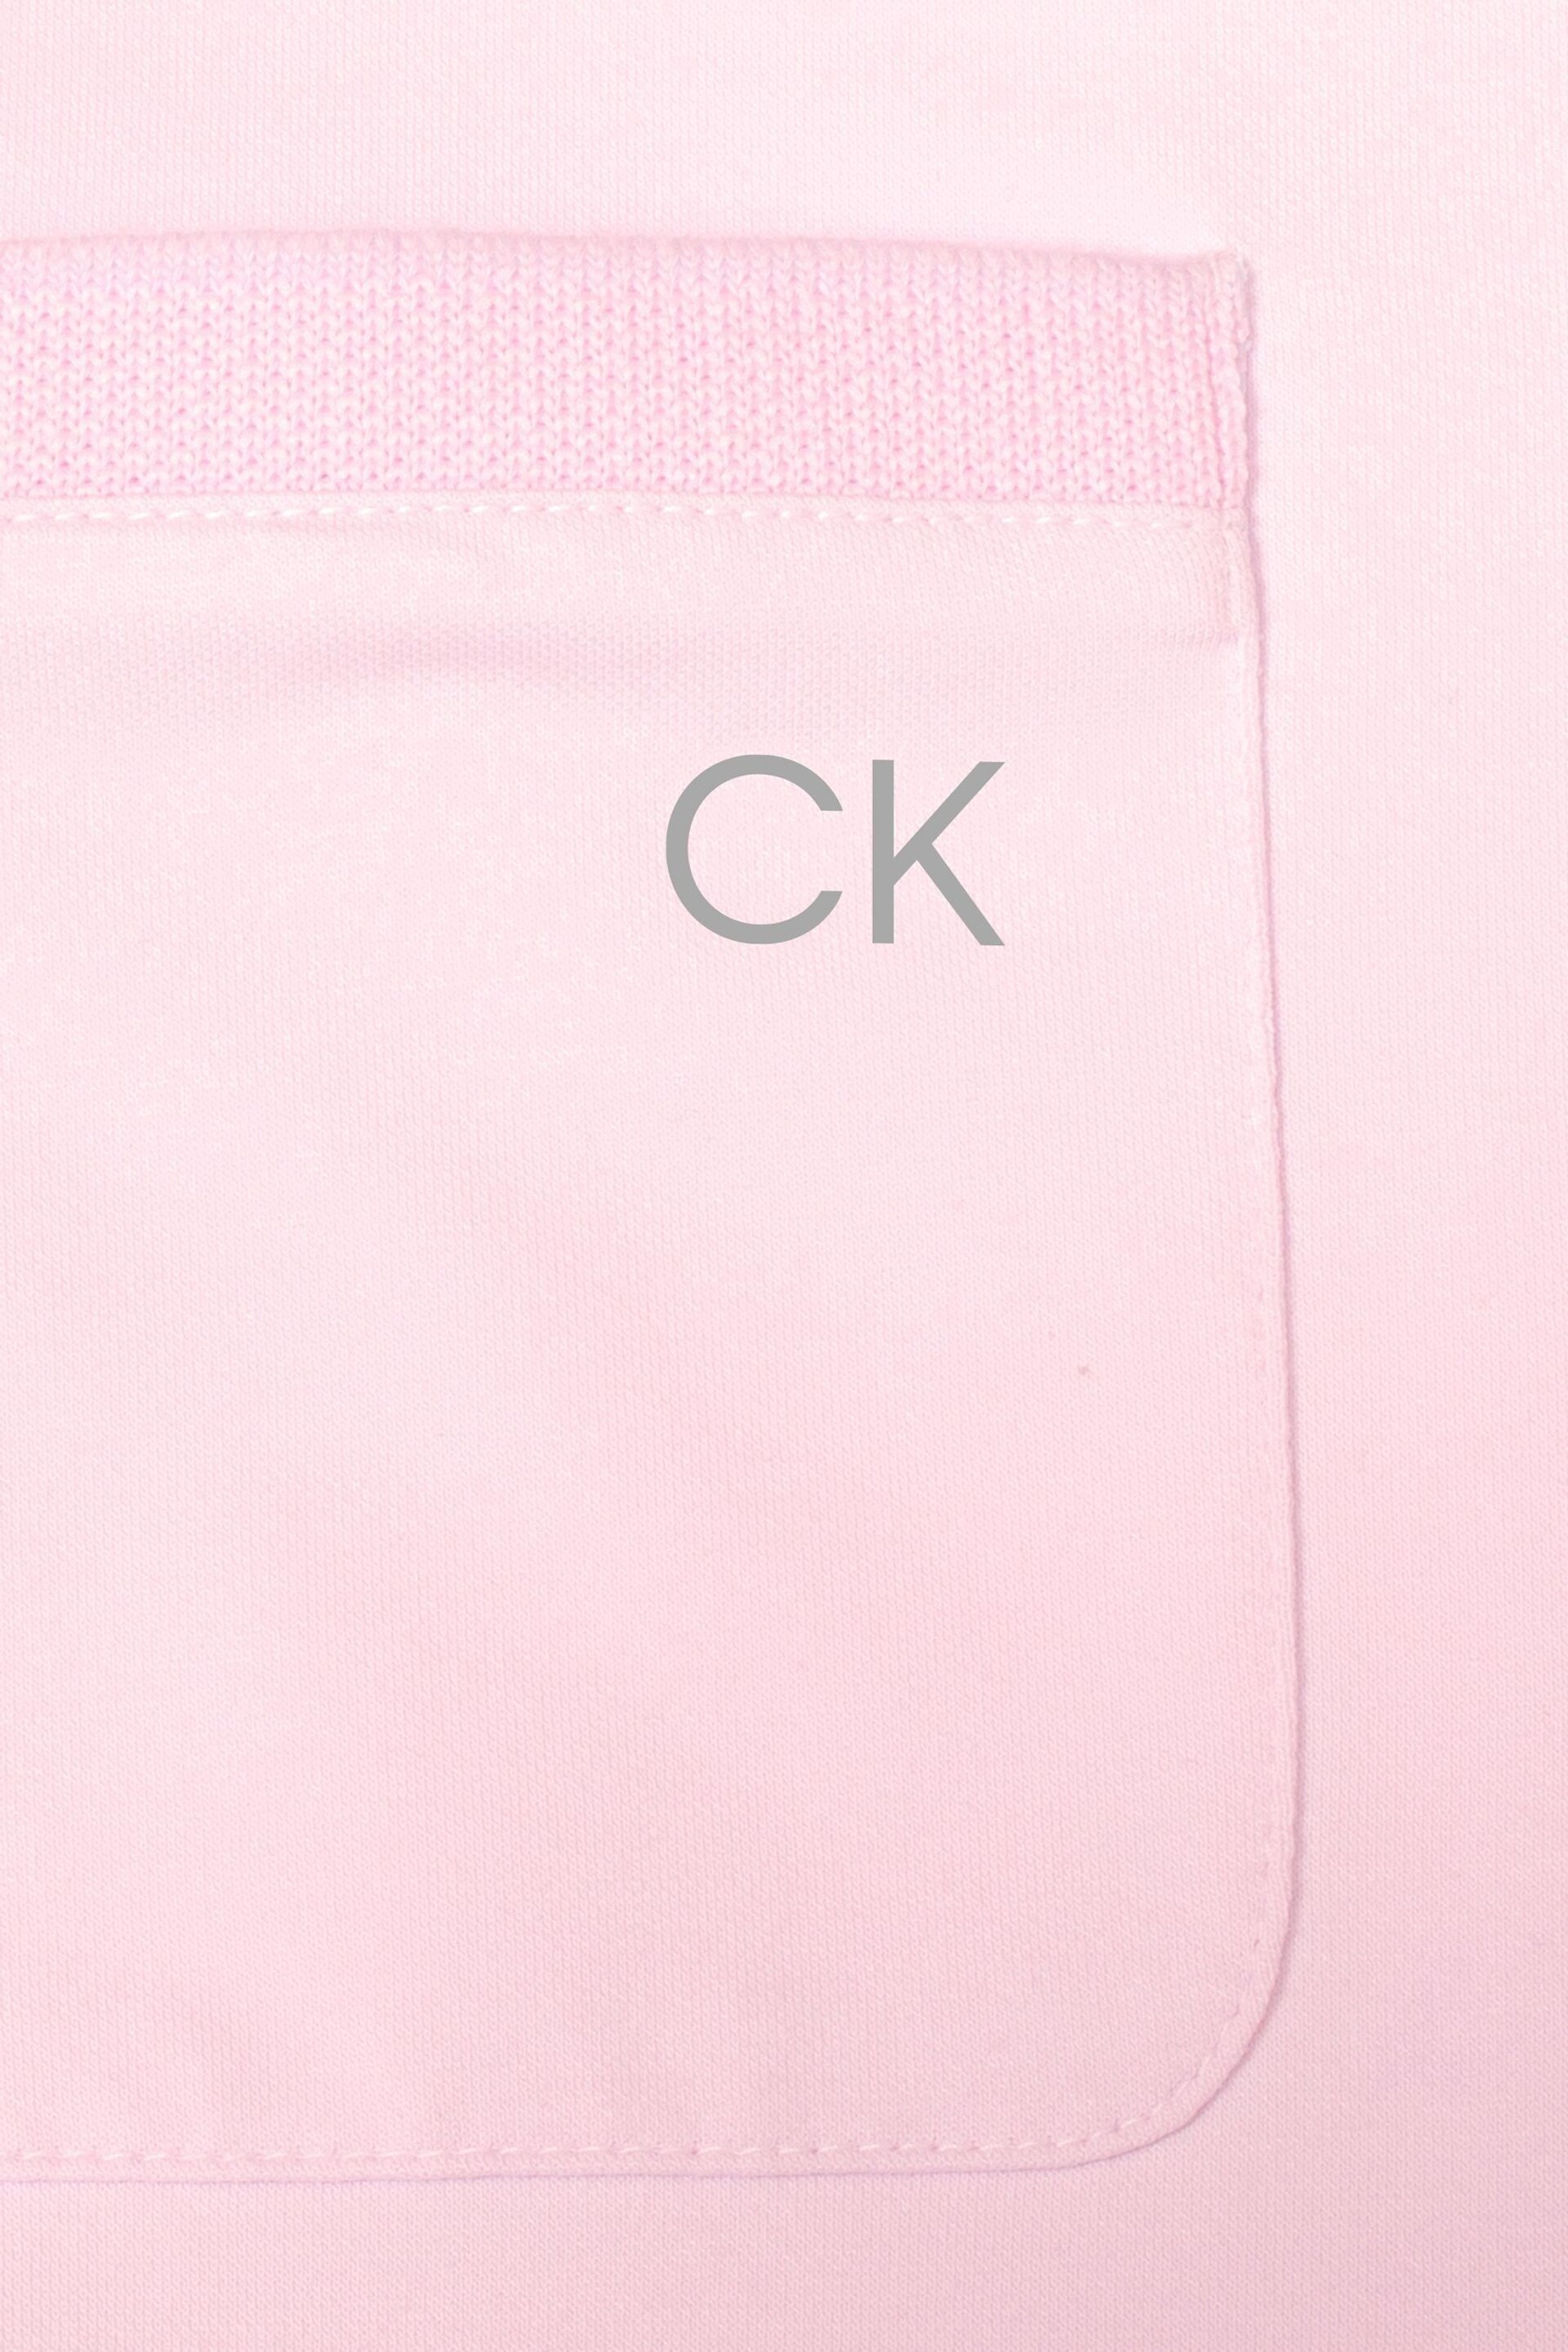 Calvin Klein Golf Pink Middlebrook Polo Shirt - Image 8 of 8